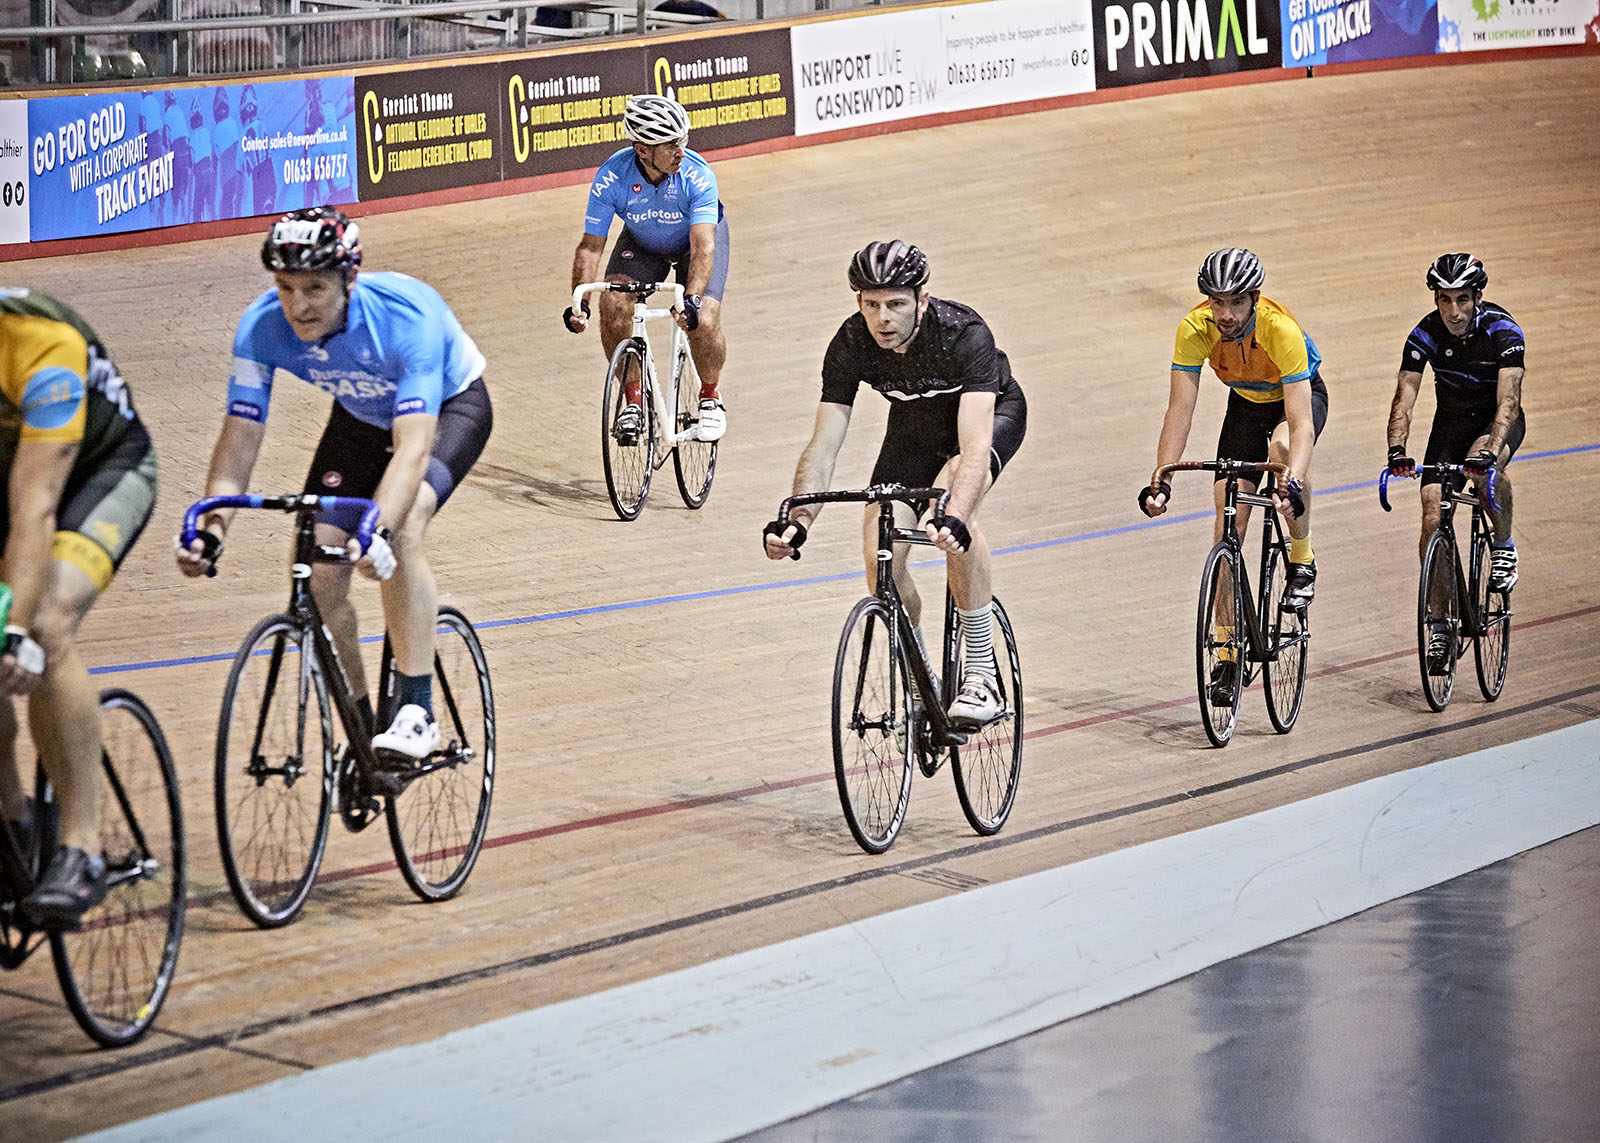 mix of people track cycling on an indoor track